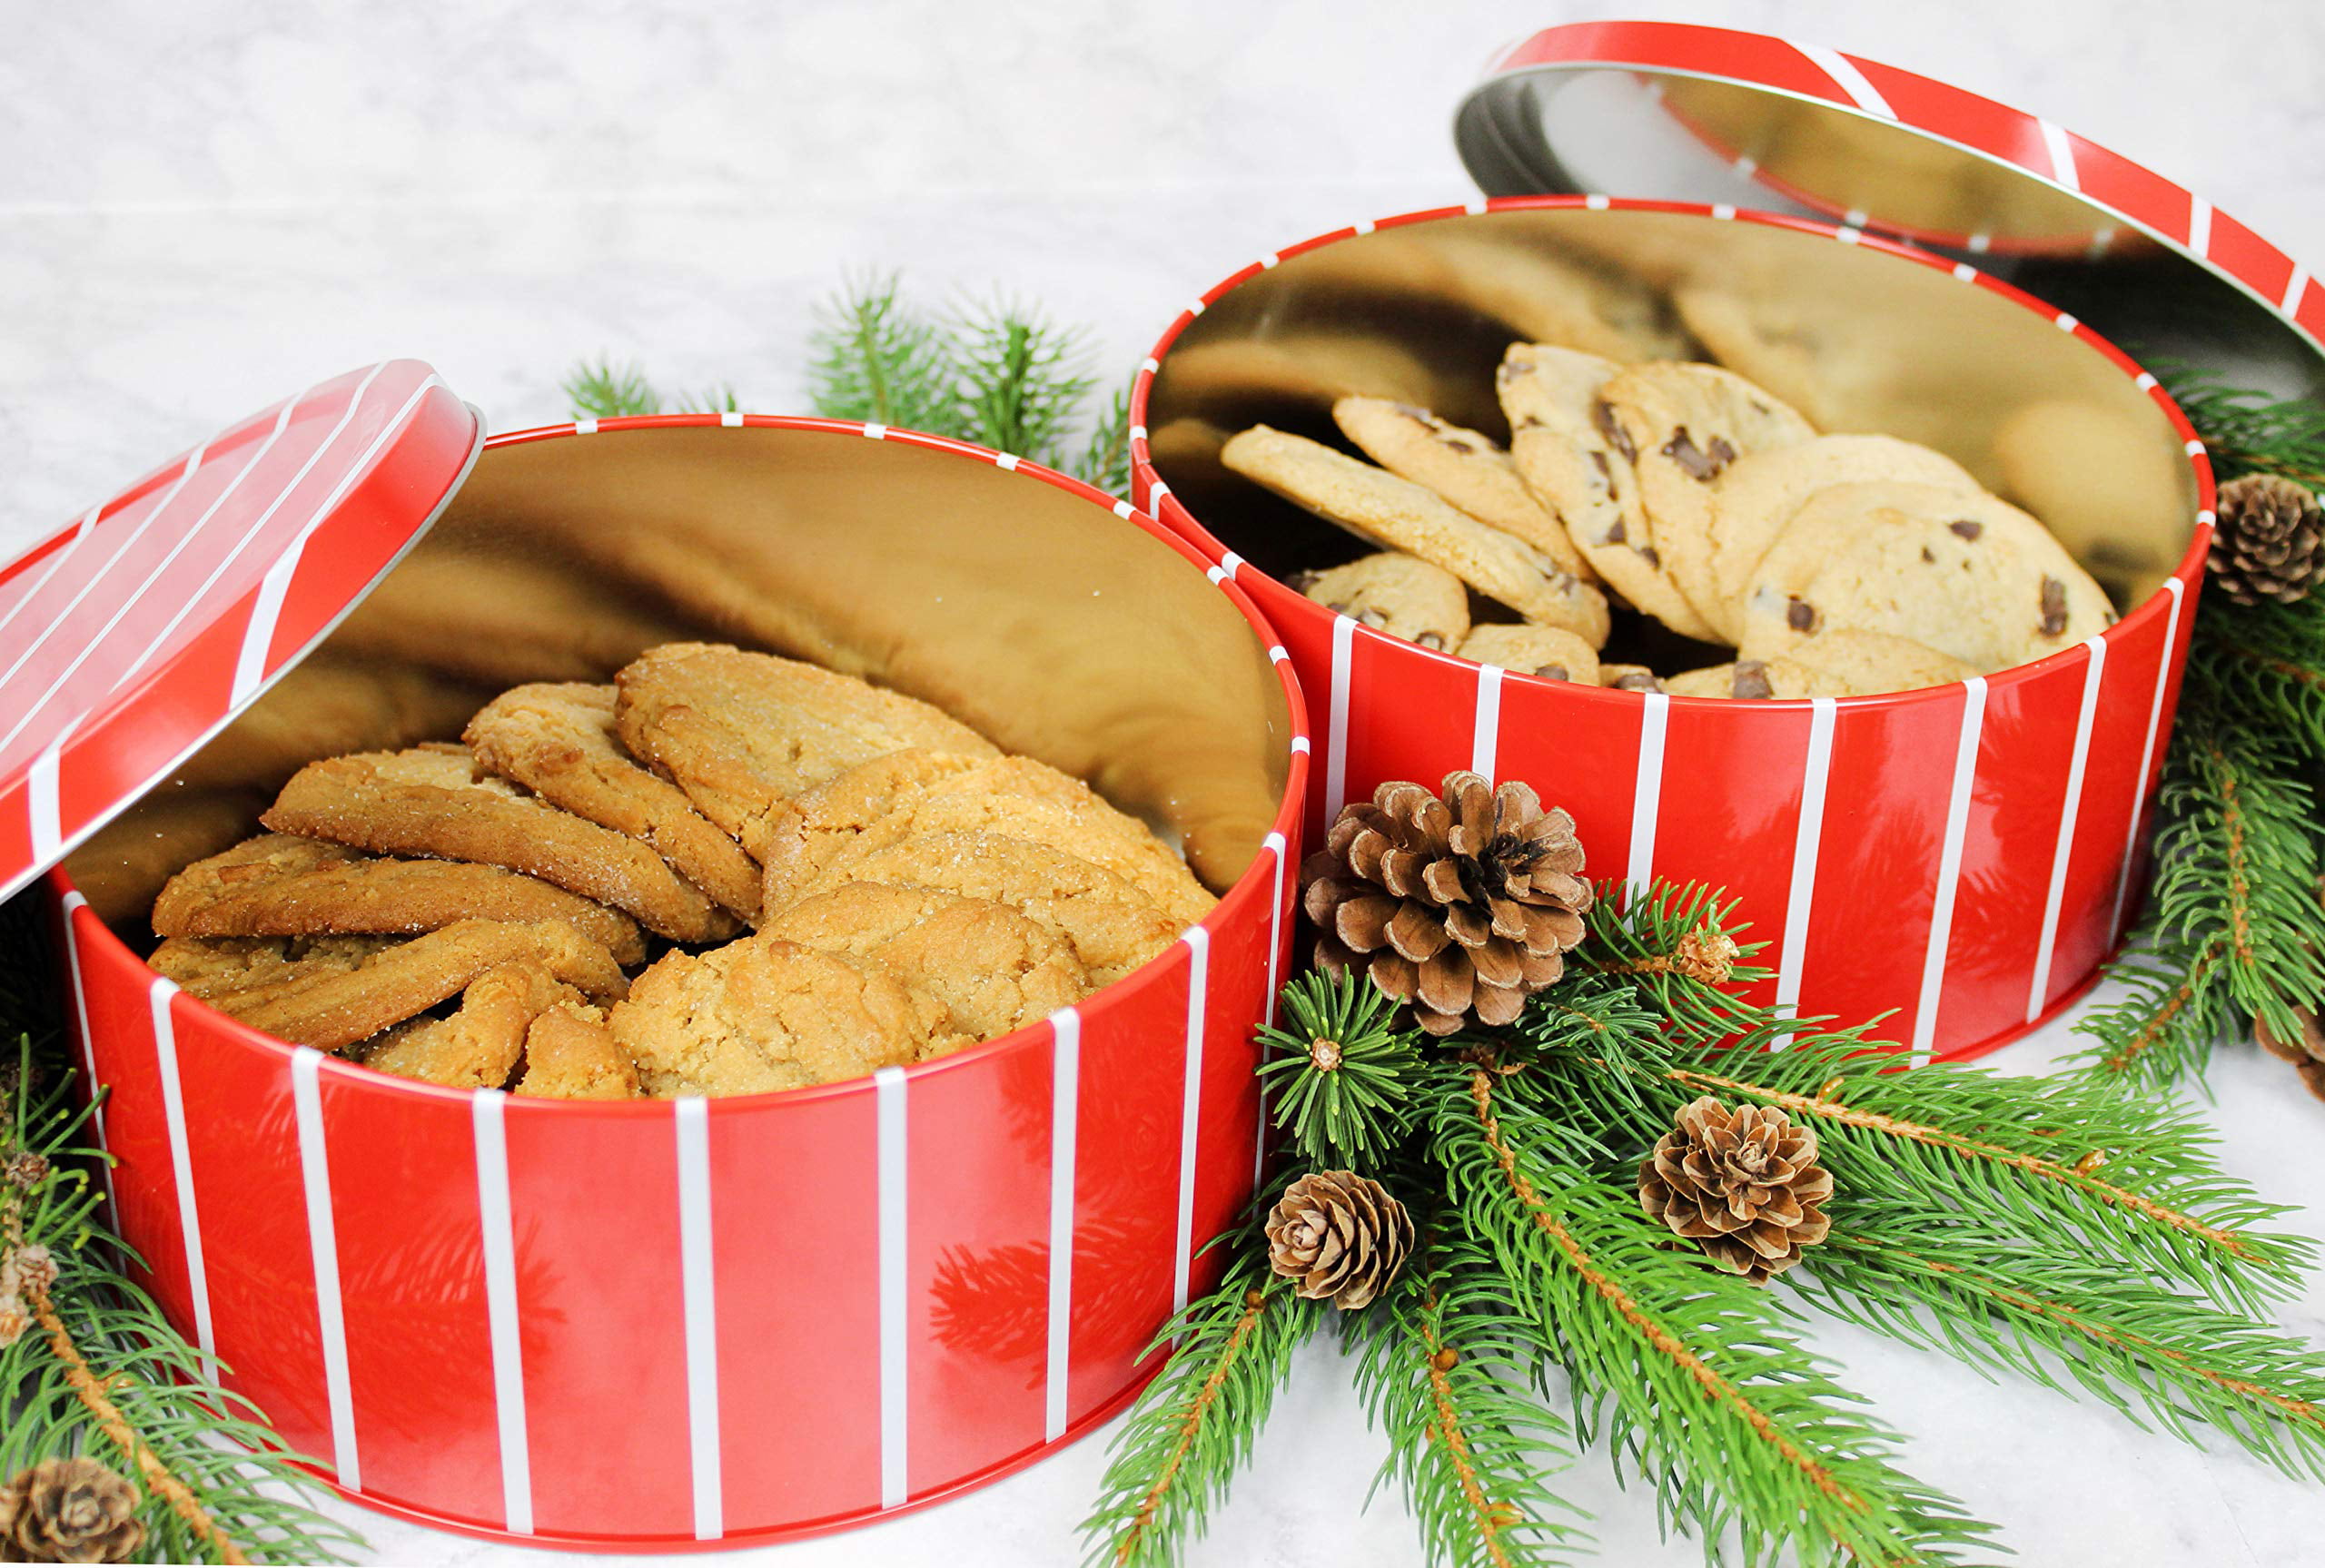 Hot sale Christmas Food Containers 2pk - Stripes ❉ Wholesale in